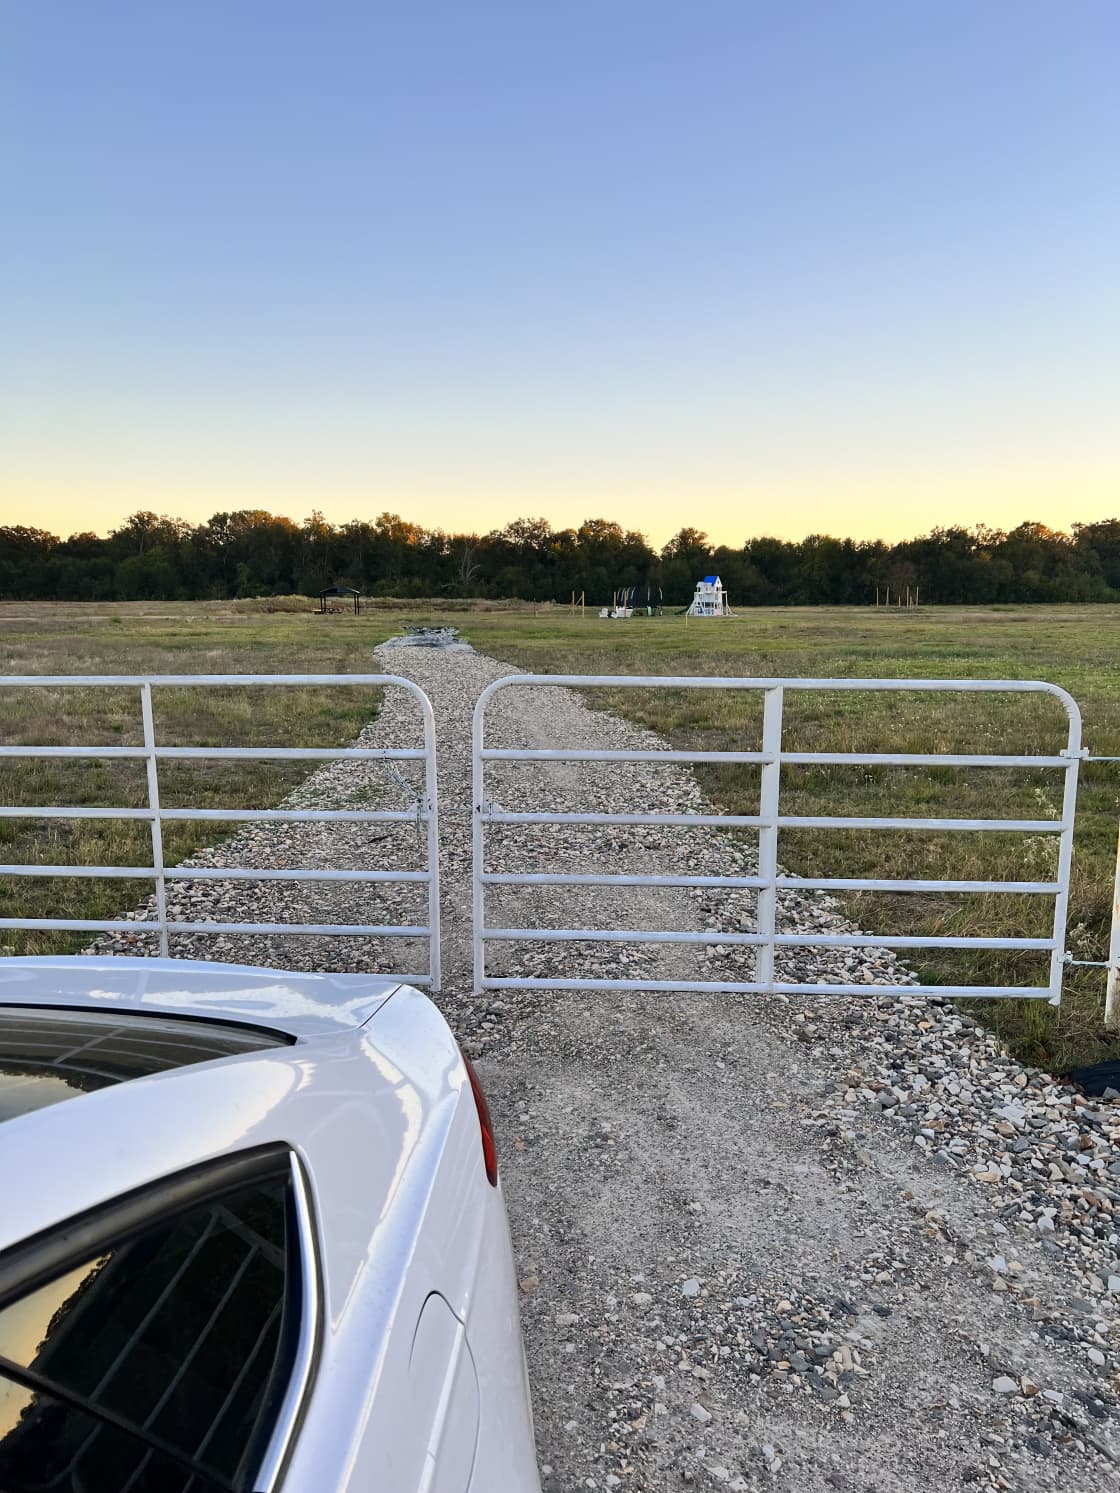 Entrance 1: White Gate with Gravel Road